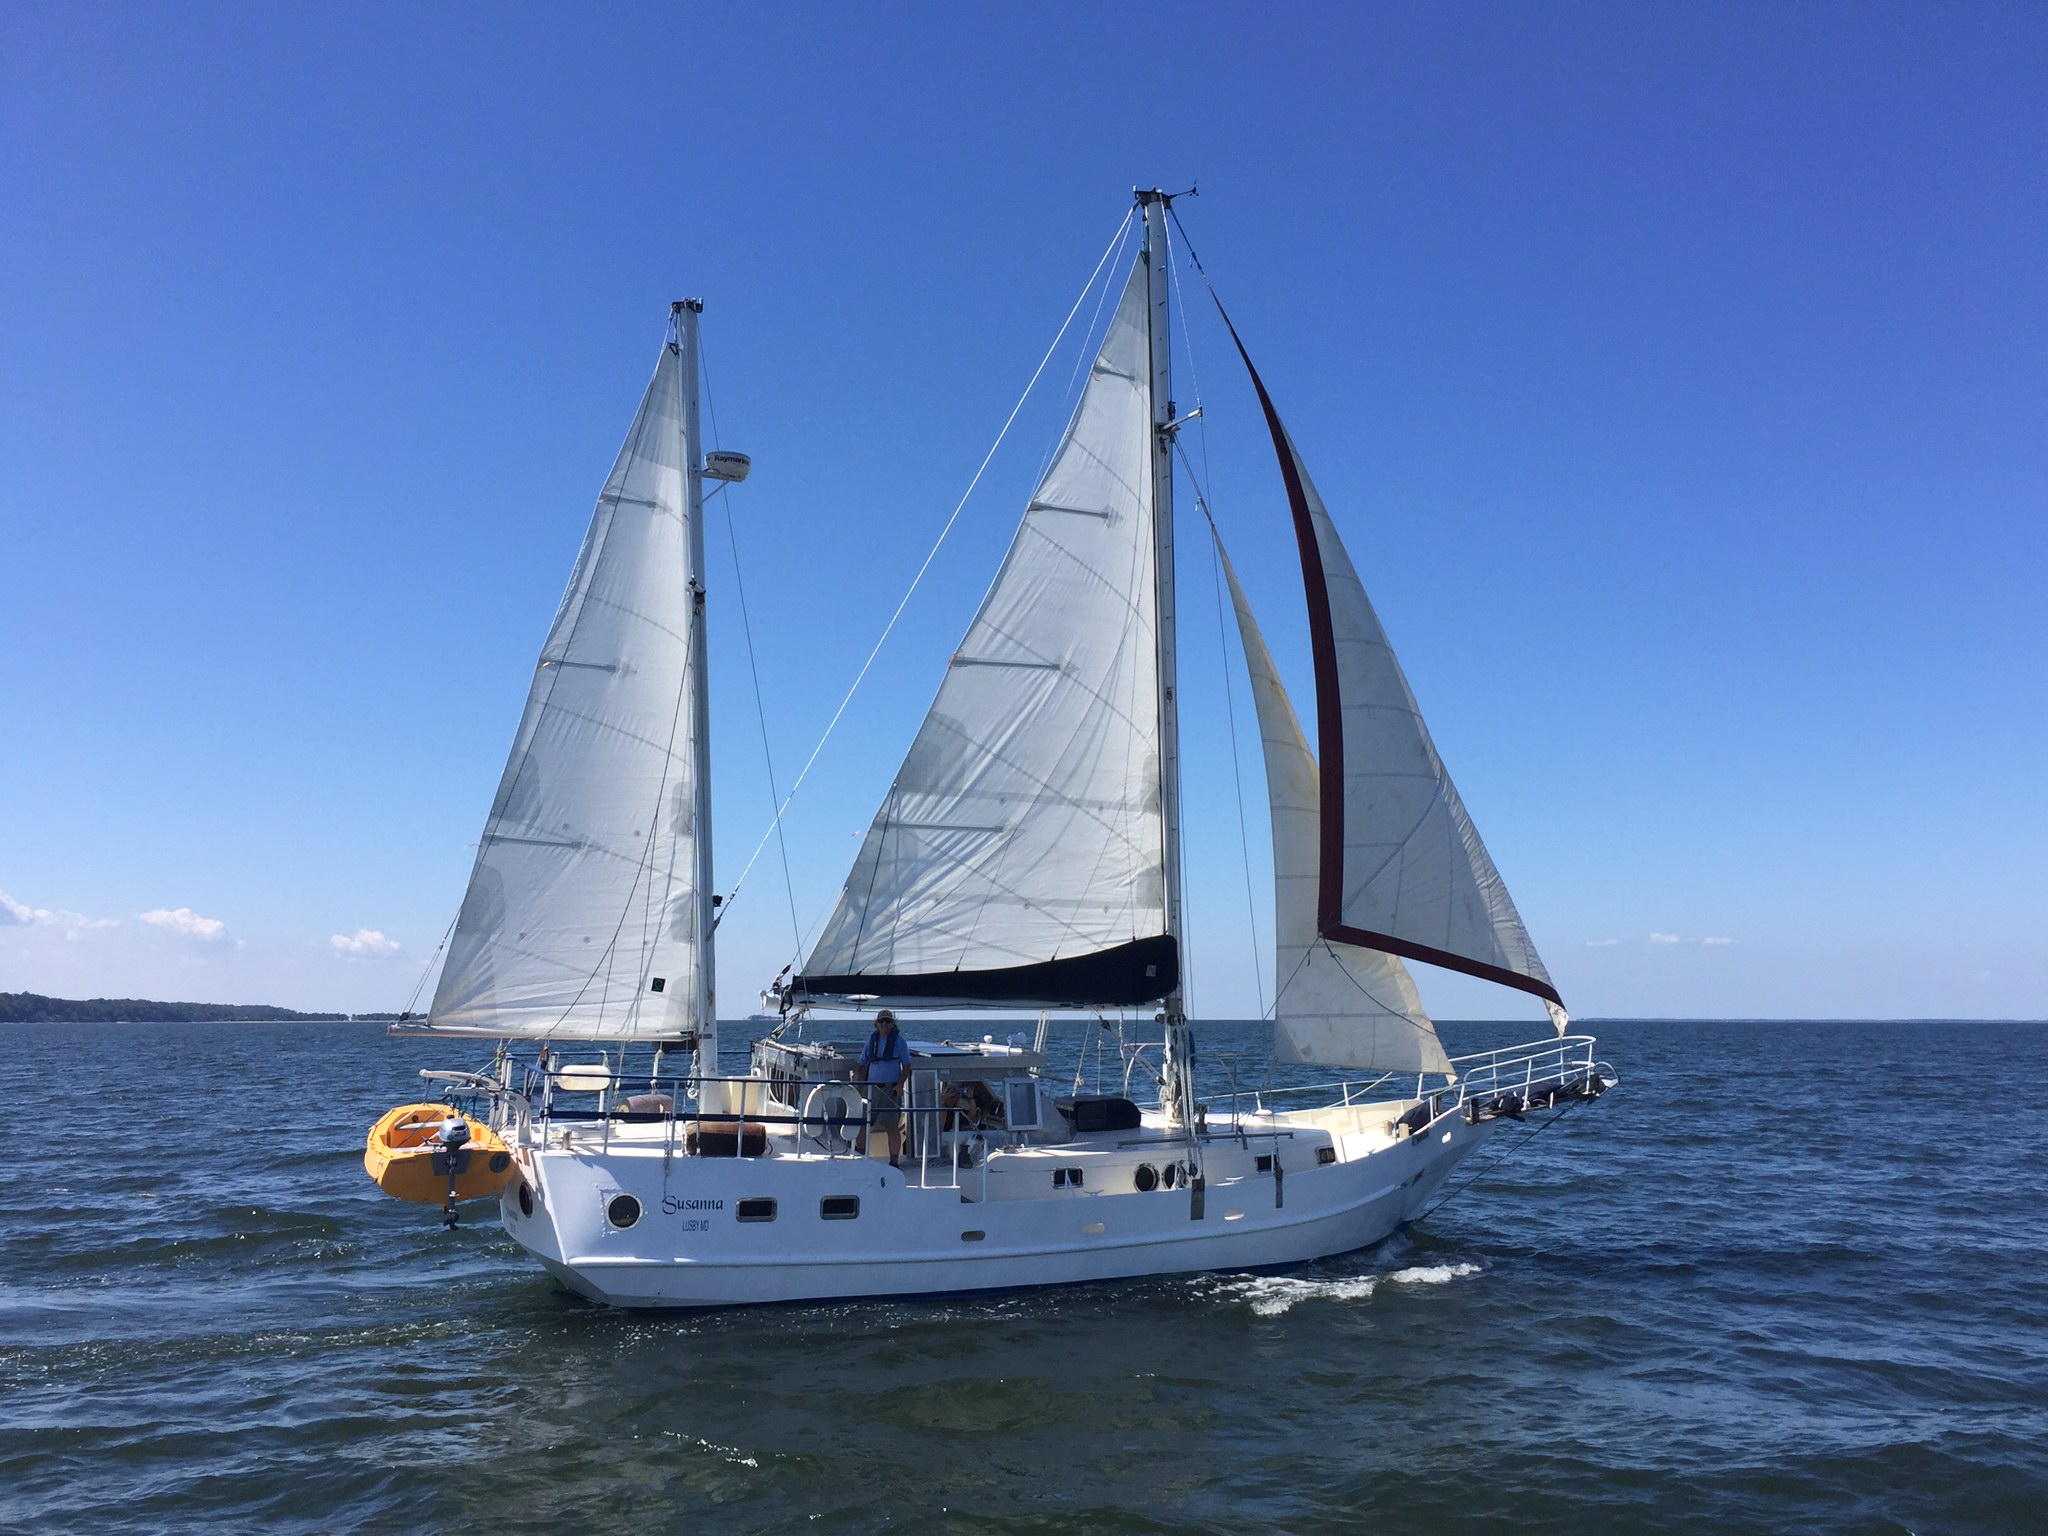 S/v Susanna For Sale On The Chesapeake Bay